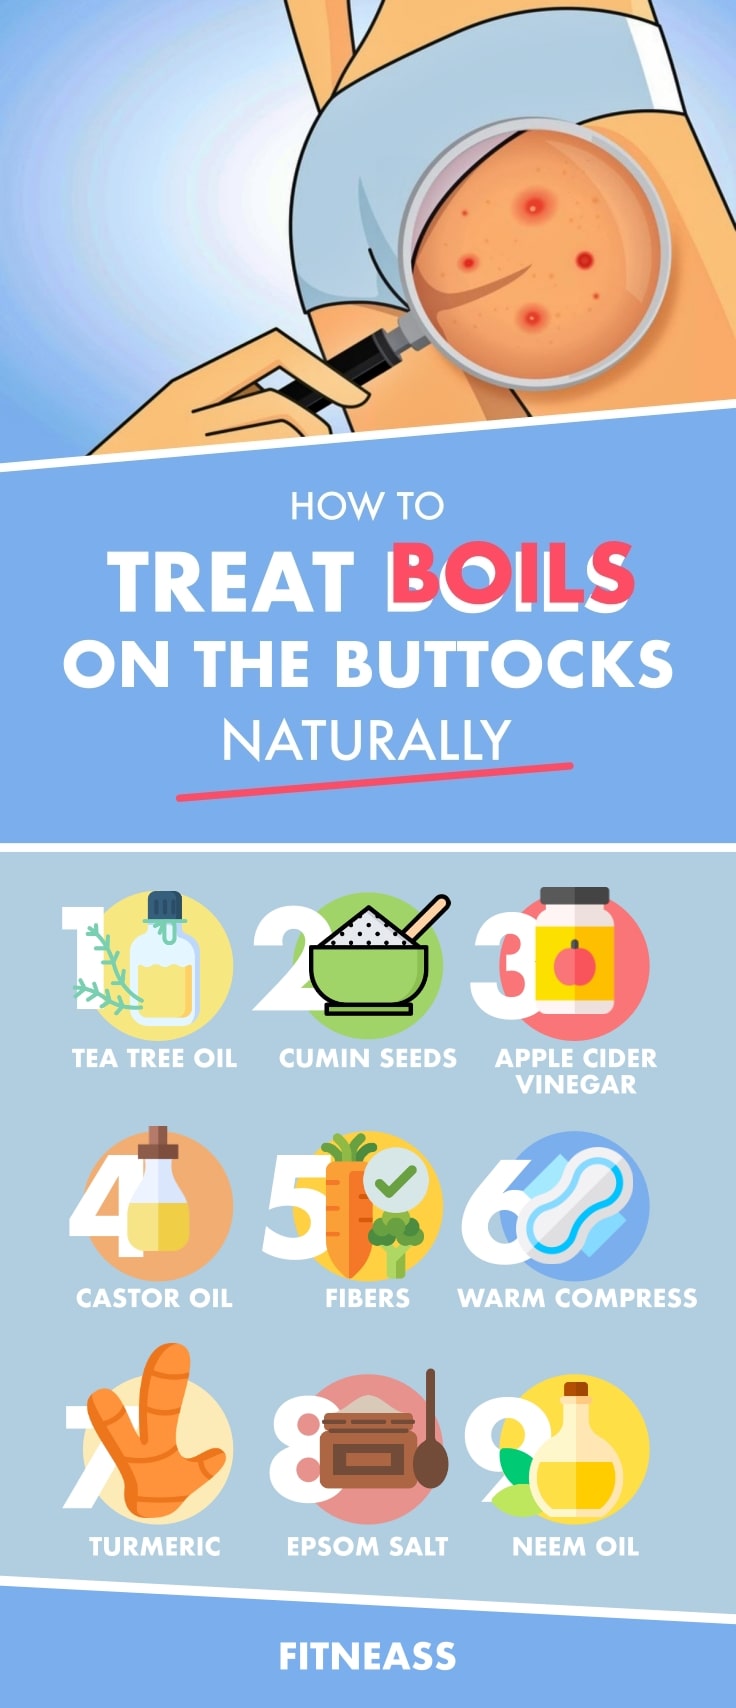 Treat Boils On The Buttocks With Natural Remedies - Infographic